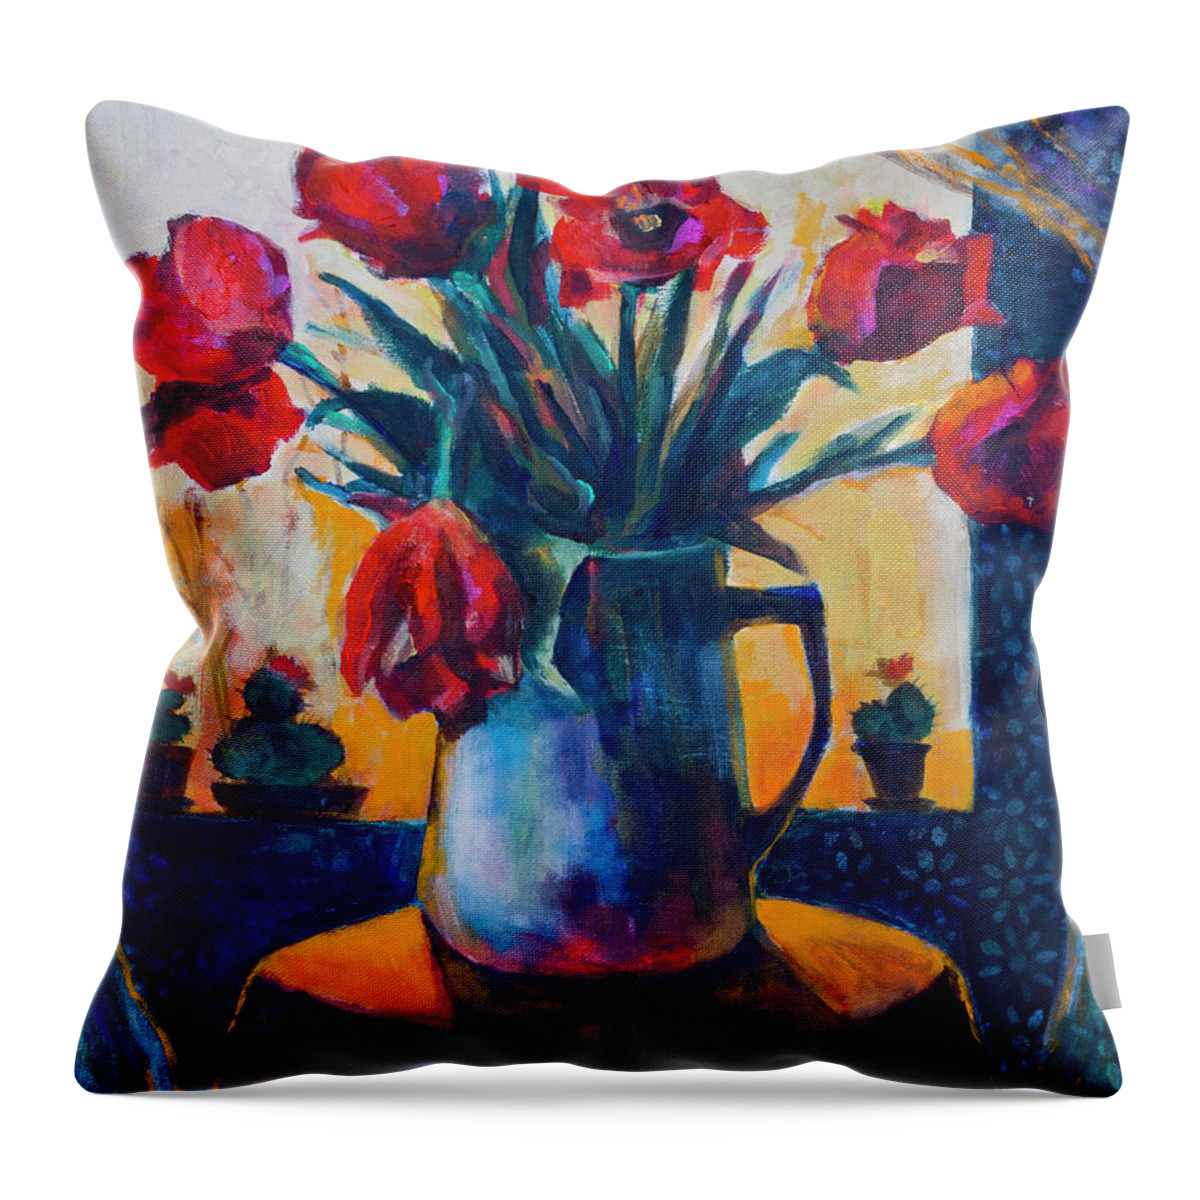  Throw Pillow featuring the painting Tulips and cacti #1 by Maxim Komissarchik